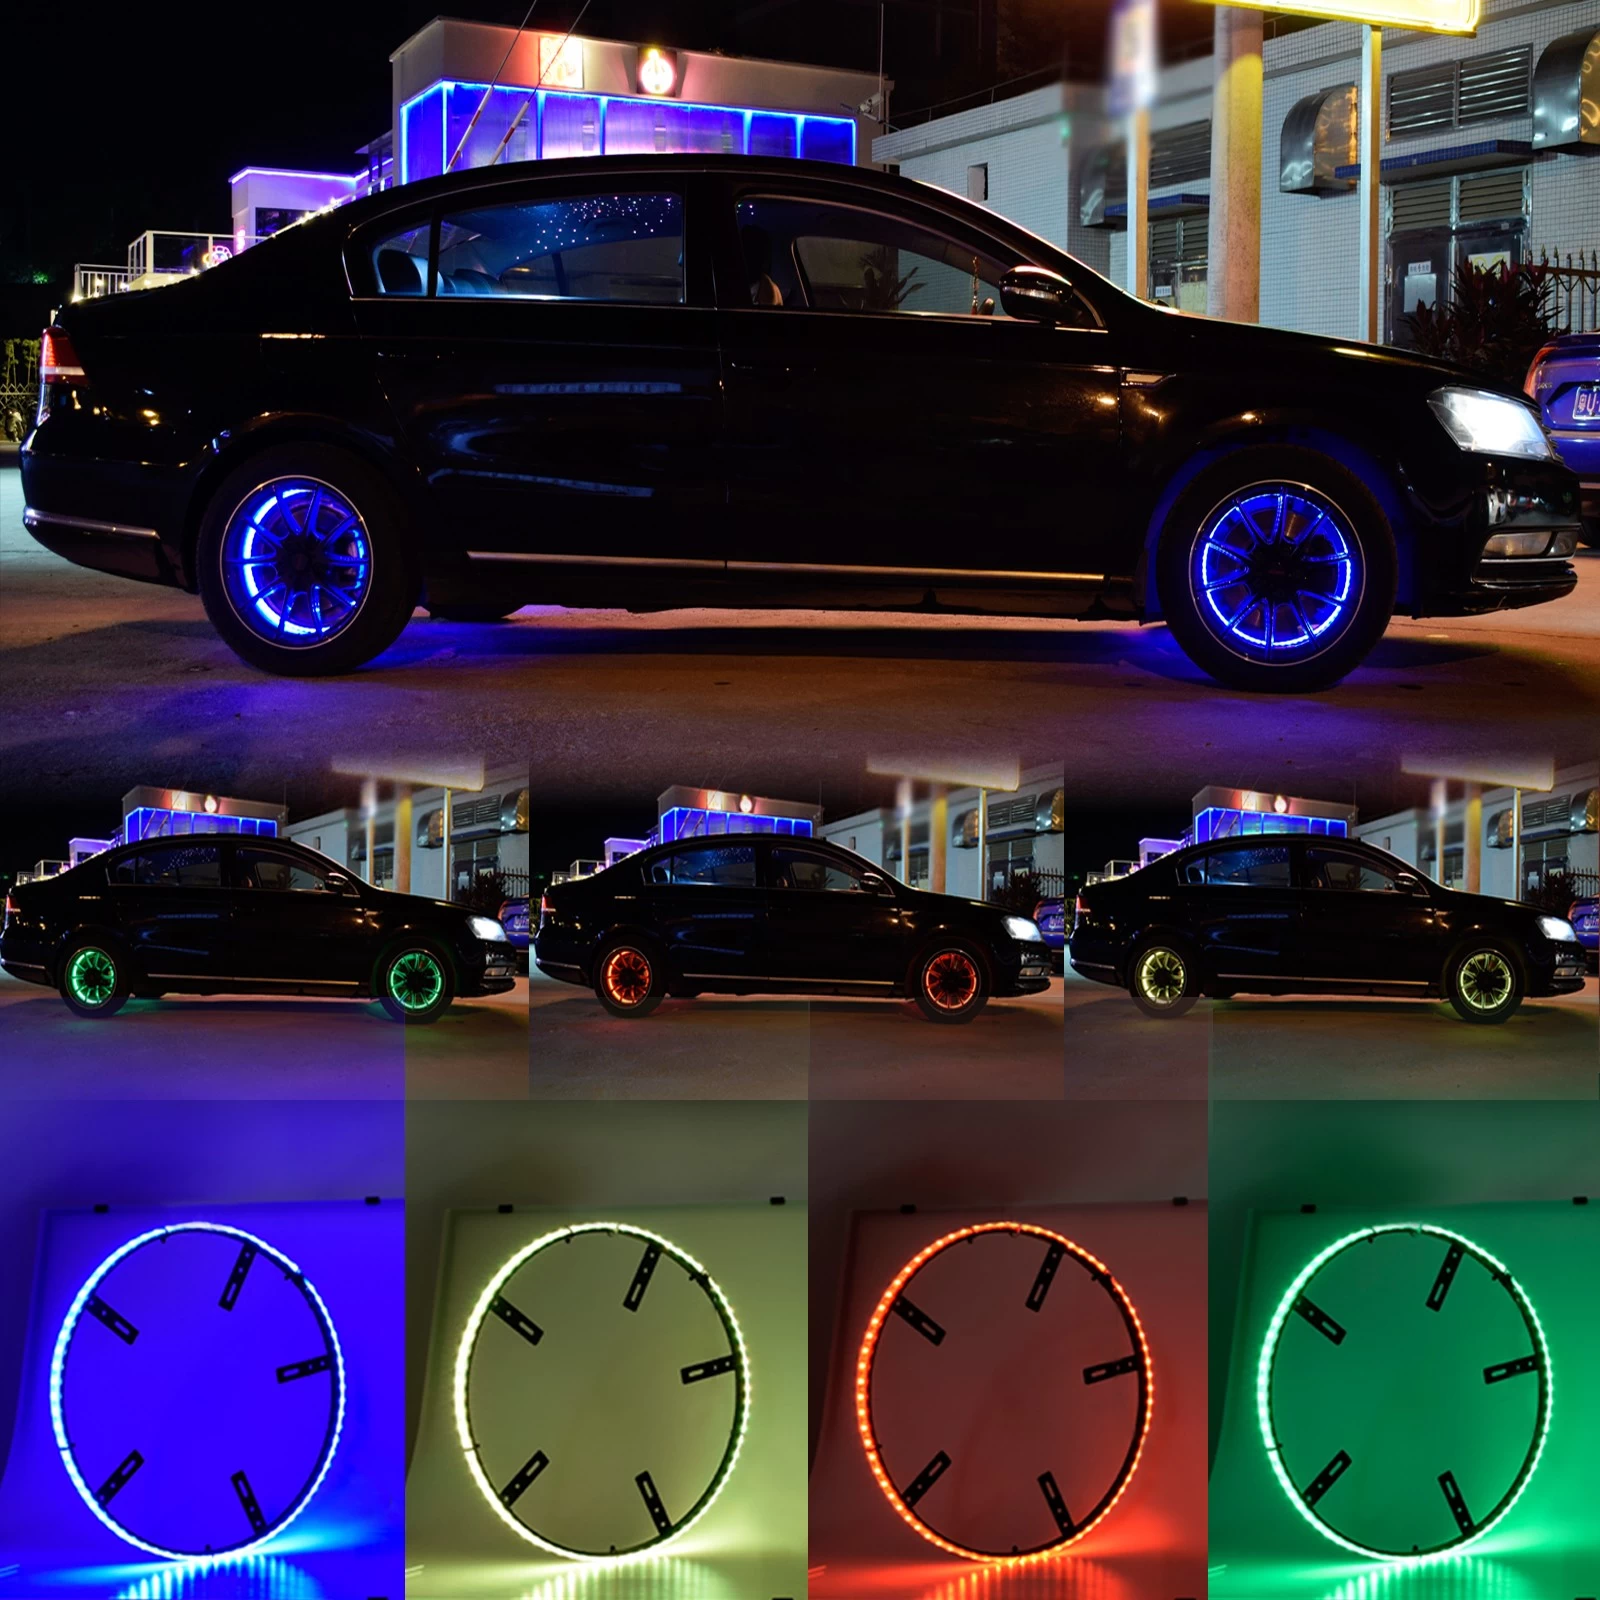 porcelana Unionlux 14.5" 15.5inch LED Wheel Ring Light Kit RGB LED Wheel Ring Light Kit Tire Lights Turn Signal And Braking Function Can Controlled By Bluetooth Multi Mode Color Waterproof fabricante